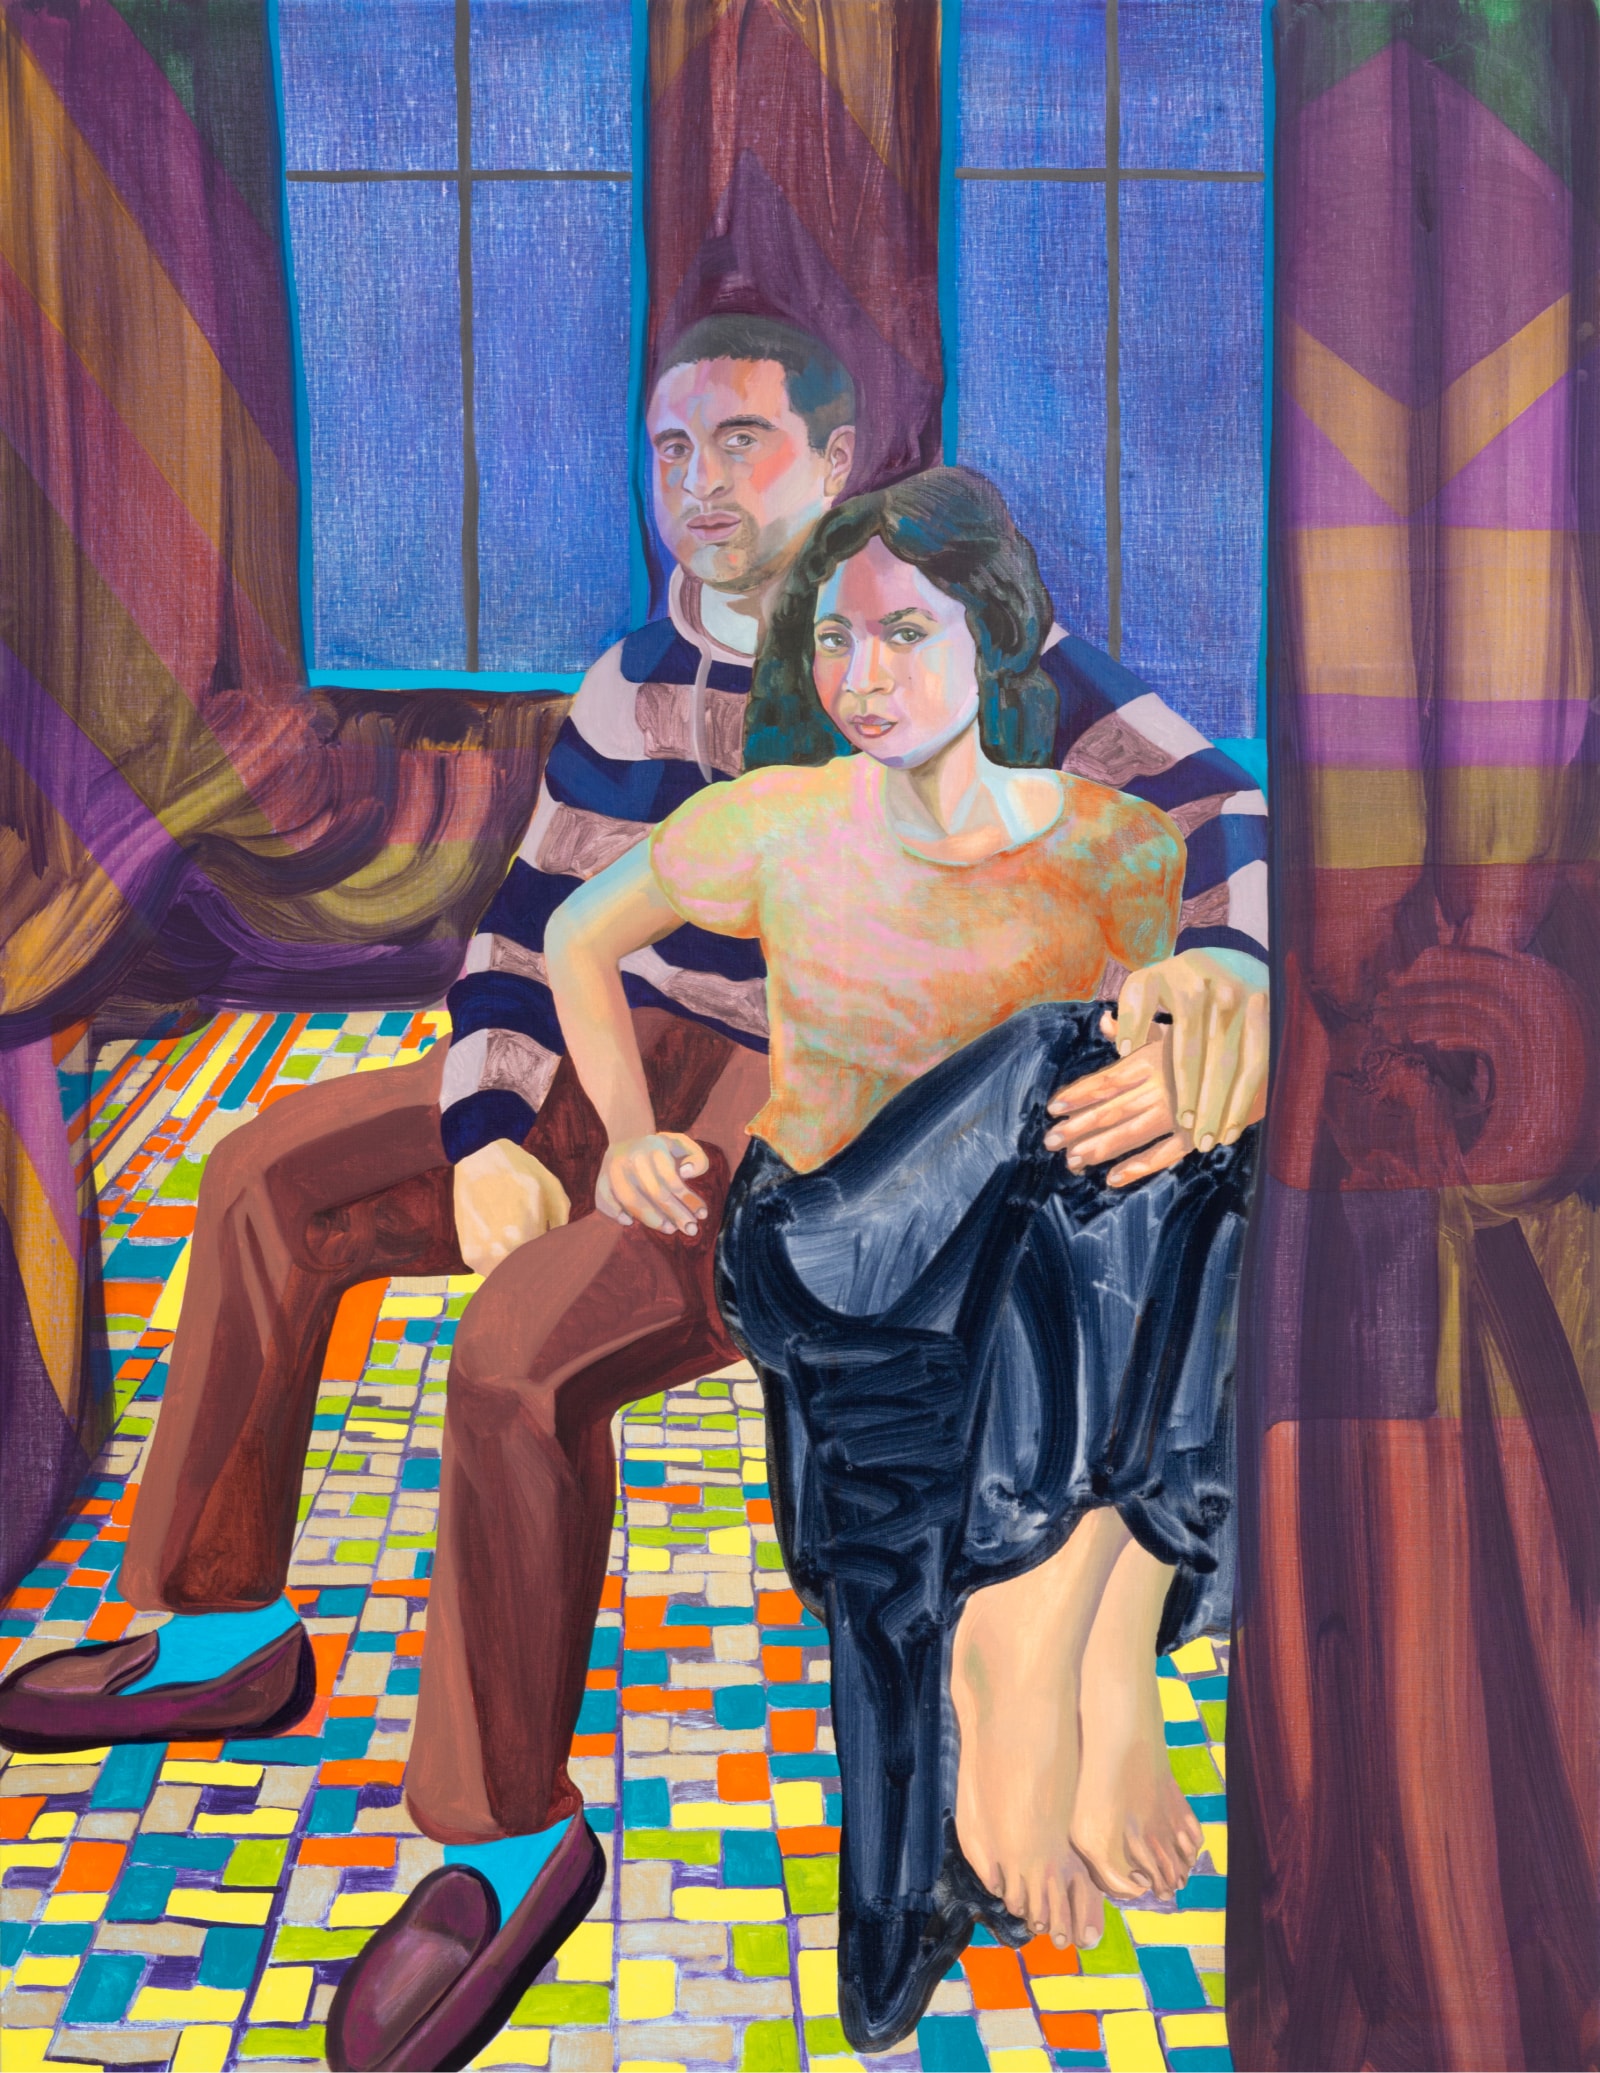 Nisenbaum’s “Karina and Christopher” featuring a woman seated against a man in a half-embrace, framed by patterned curtains